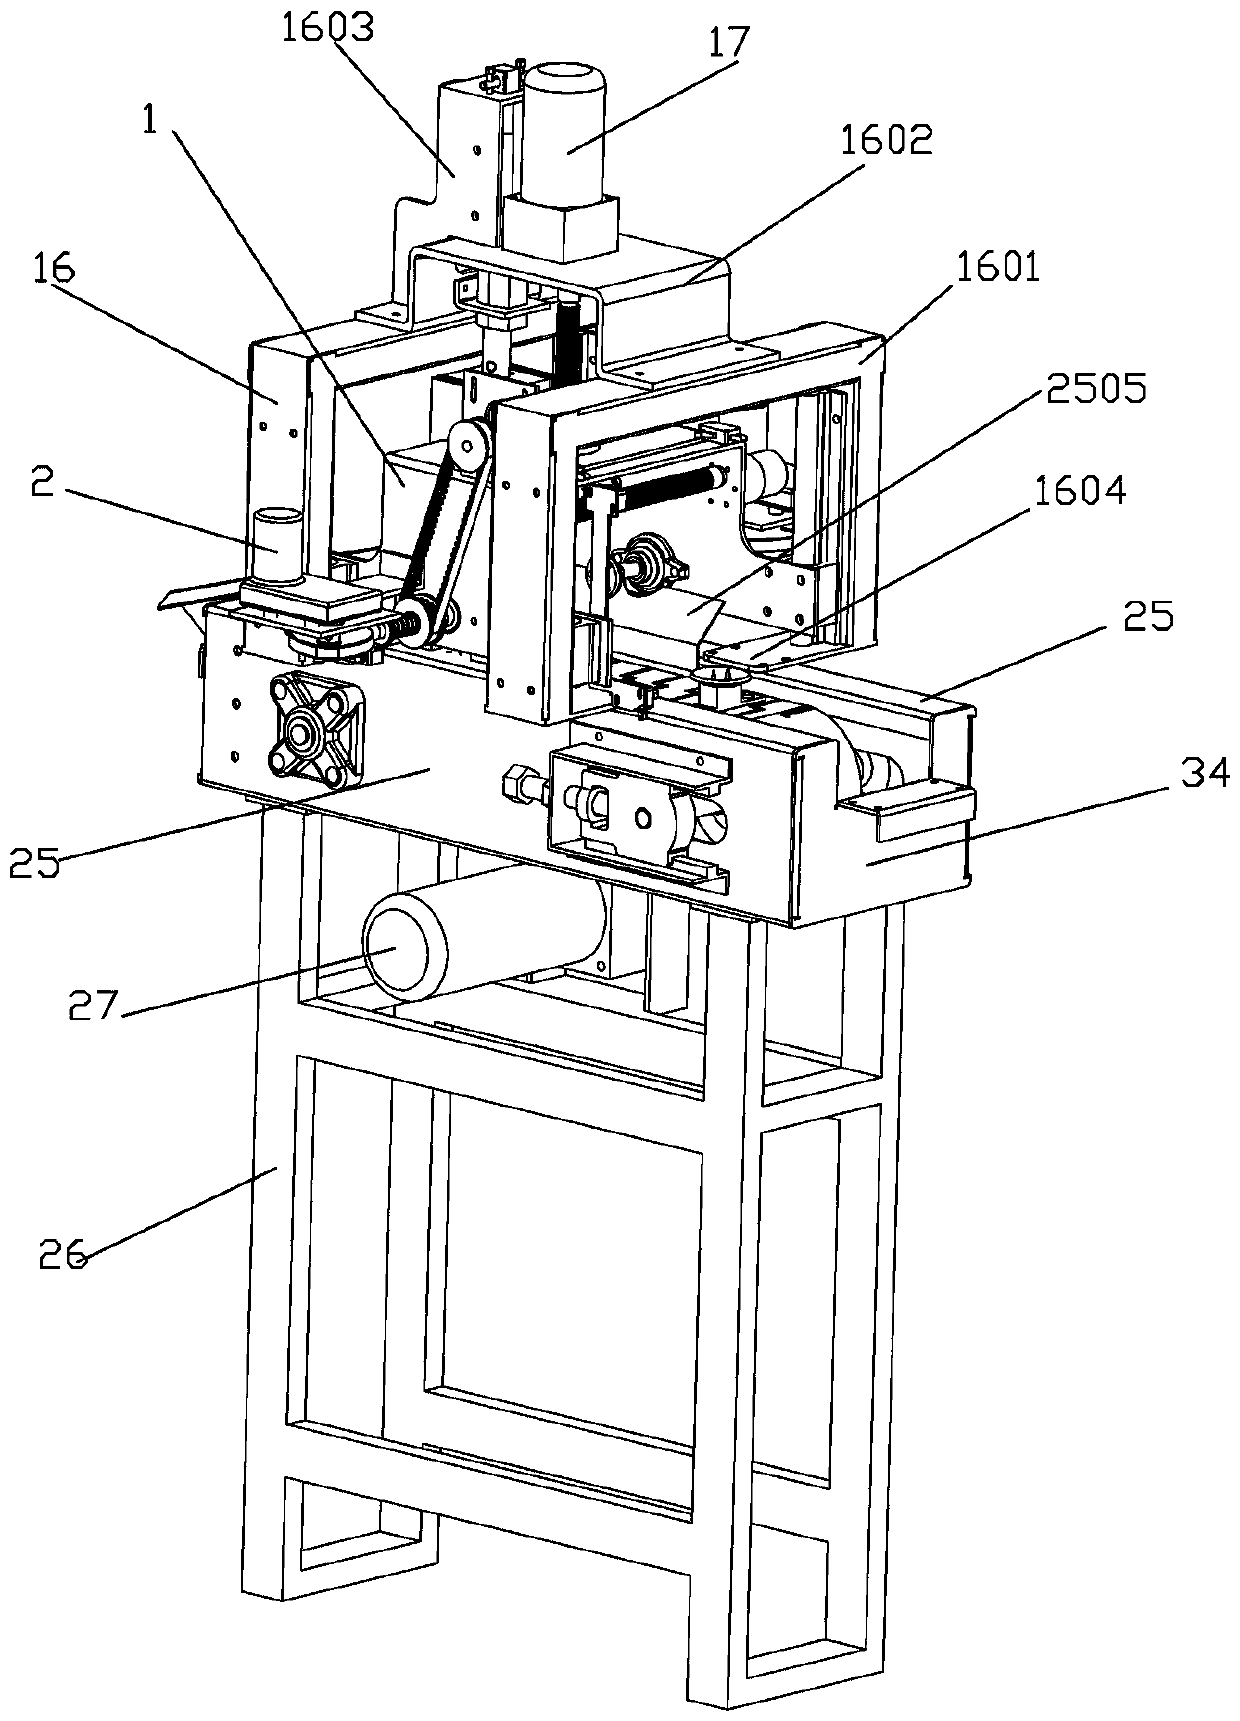 Peeling device for juicer